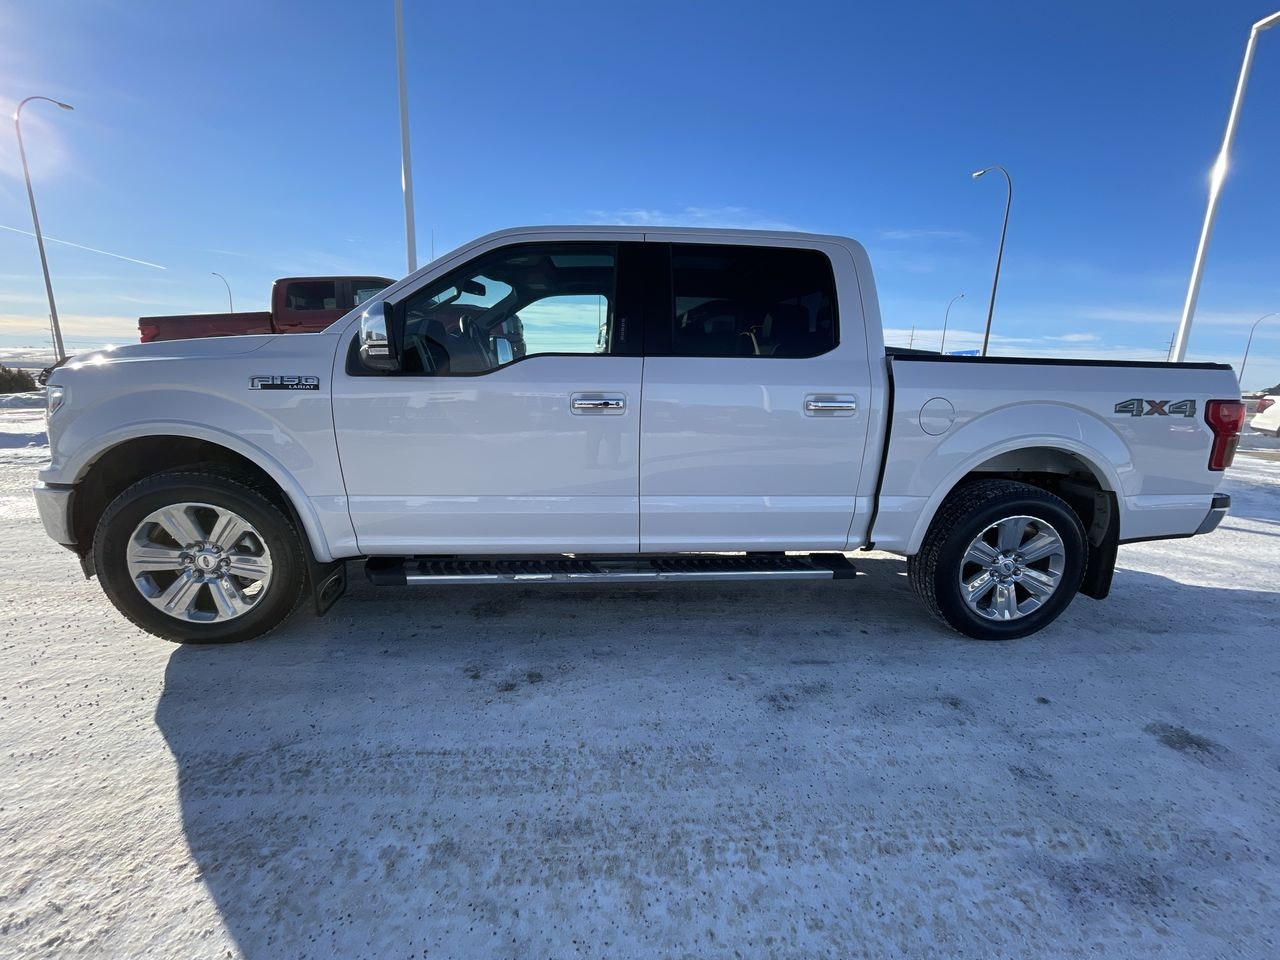 2018 Ford F-150 Crew Cab 4x4 Lariat Chrome MOON ROOF NAVIGATION LEATHER HEATED/COOLE SEAT (T122180A) Main Image